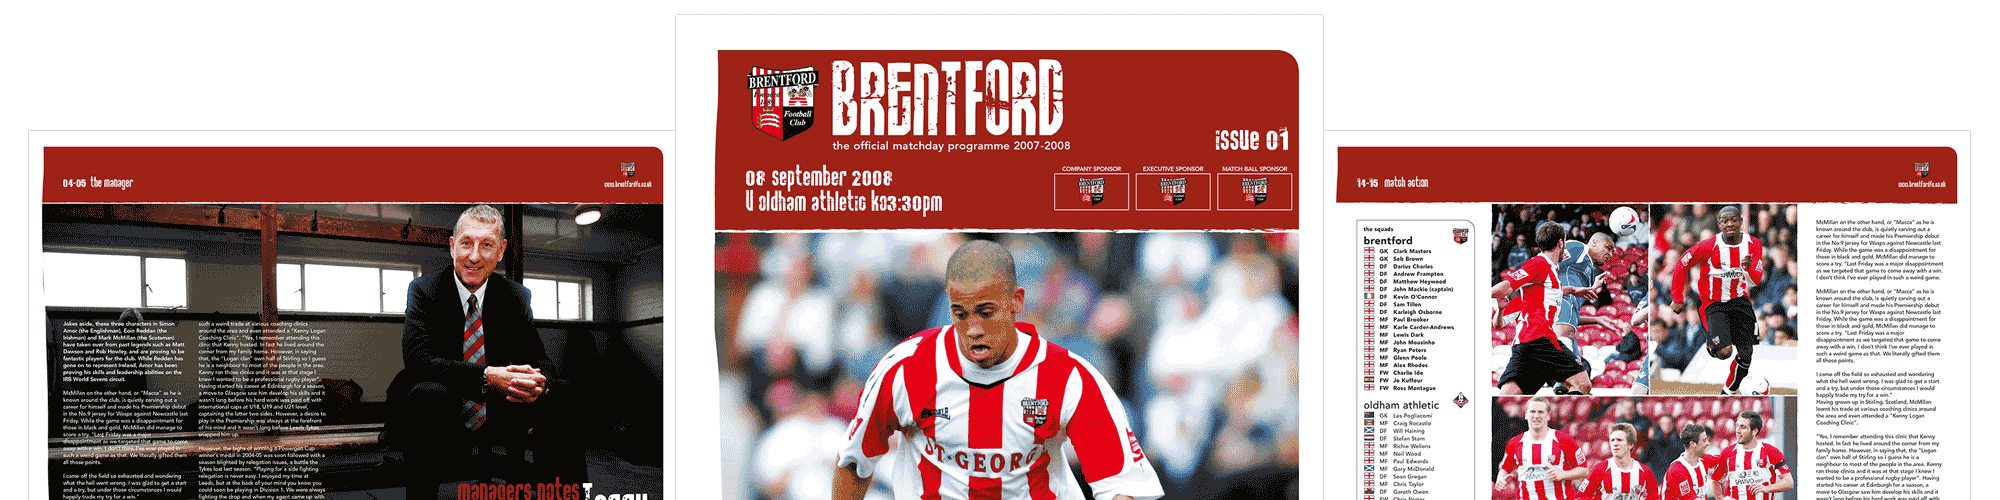 Screenshot of the Brentford Football Club case study by Michael Saunders